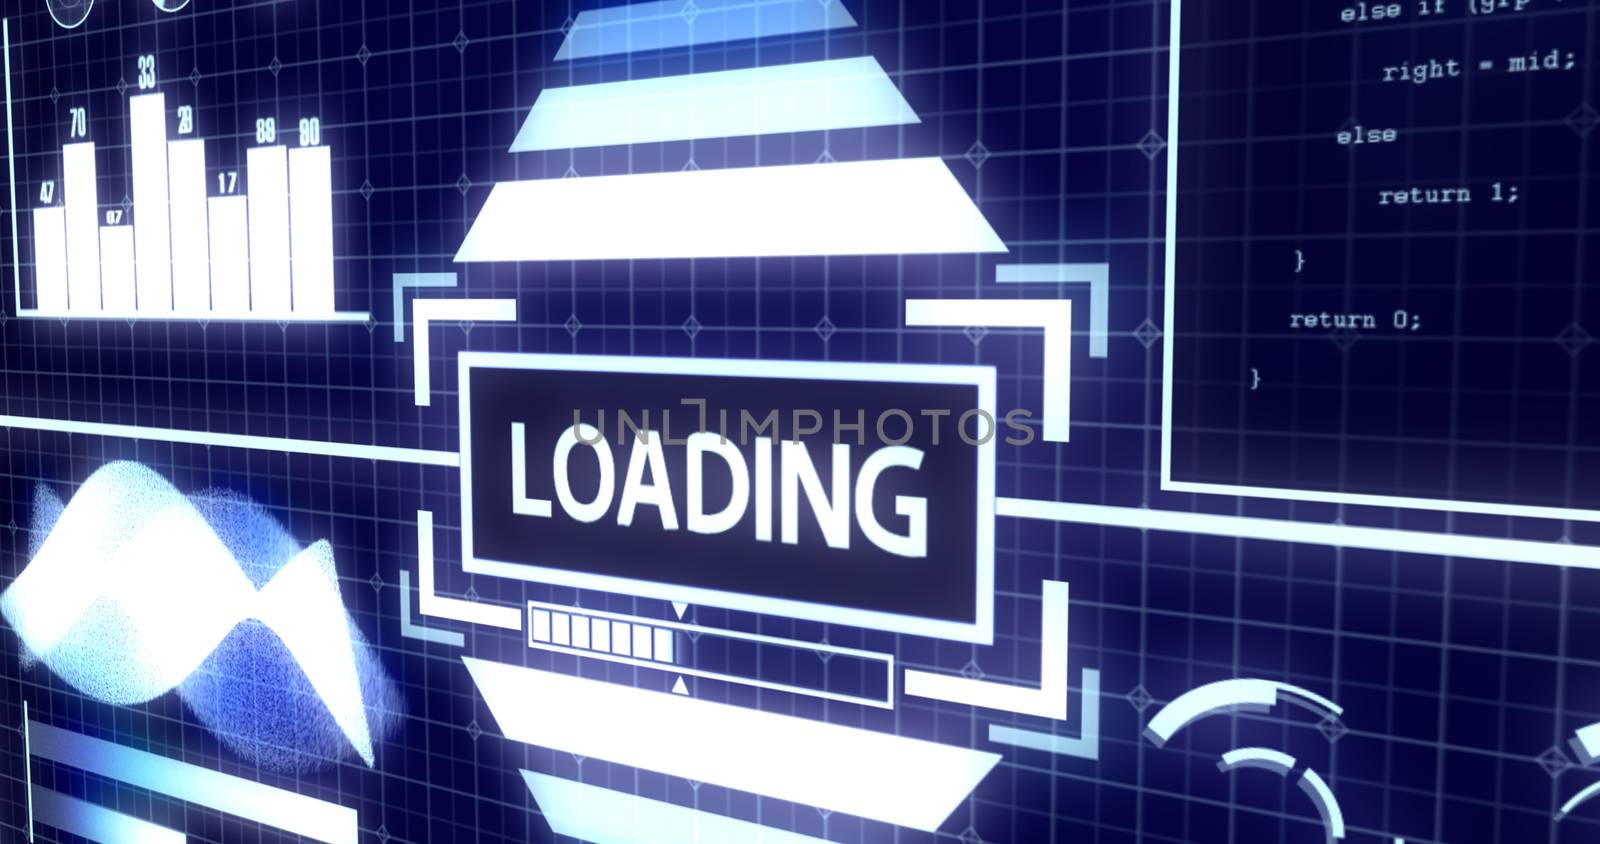 Loading Screen with Process Bar and Digital objects including Soundwave, Graph, Chart, Circles, Radar, Hacker typing and Glowing light bars Ver.3 by ariya23156